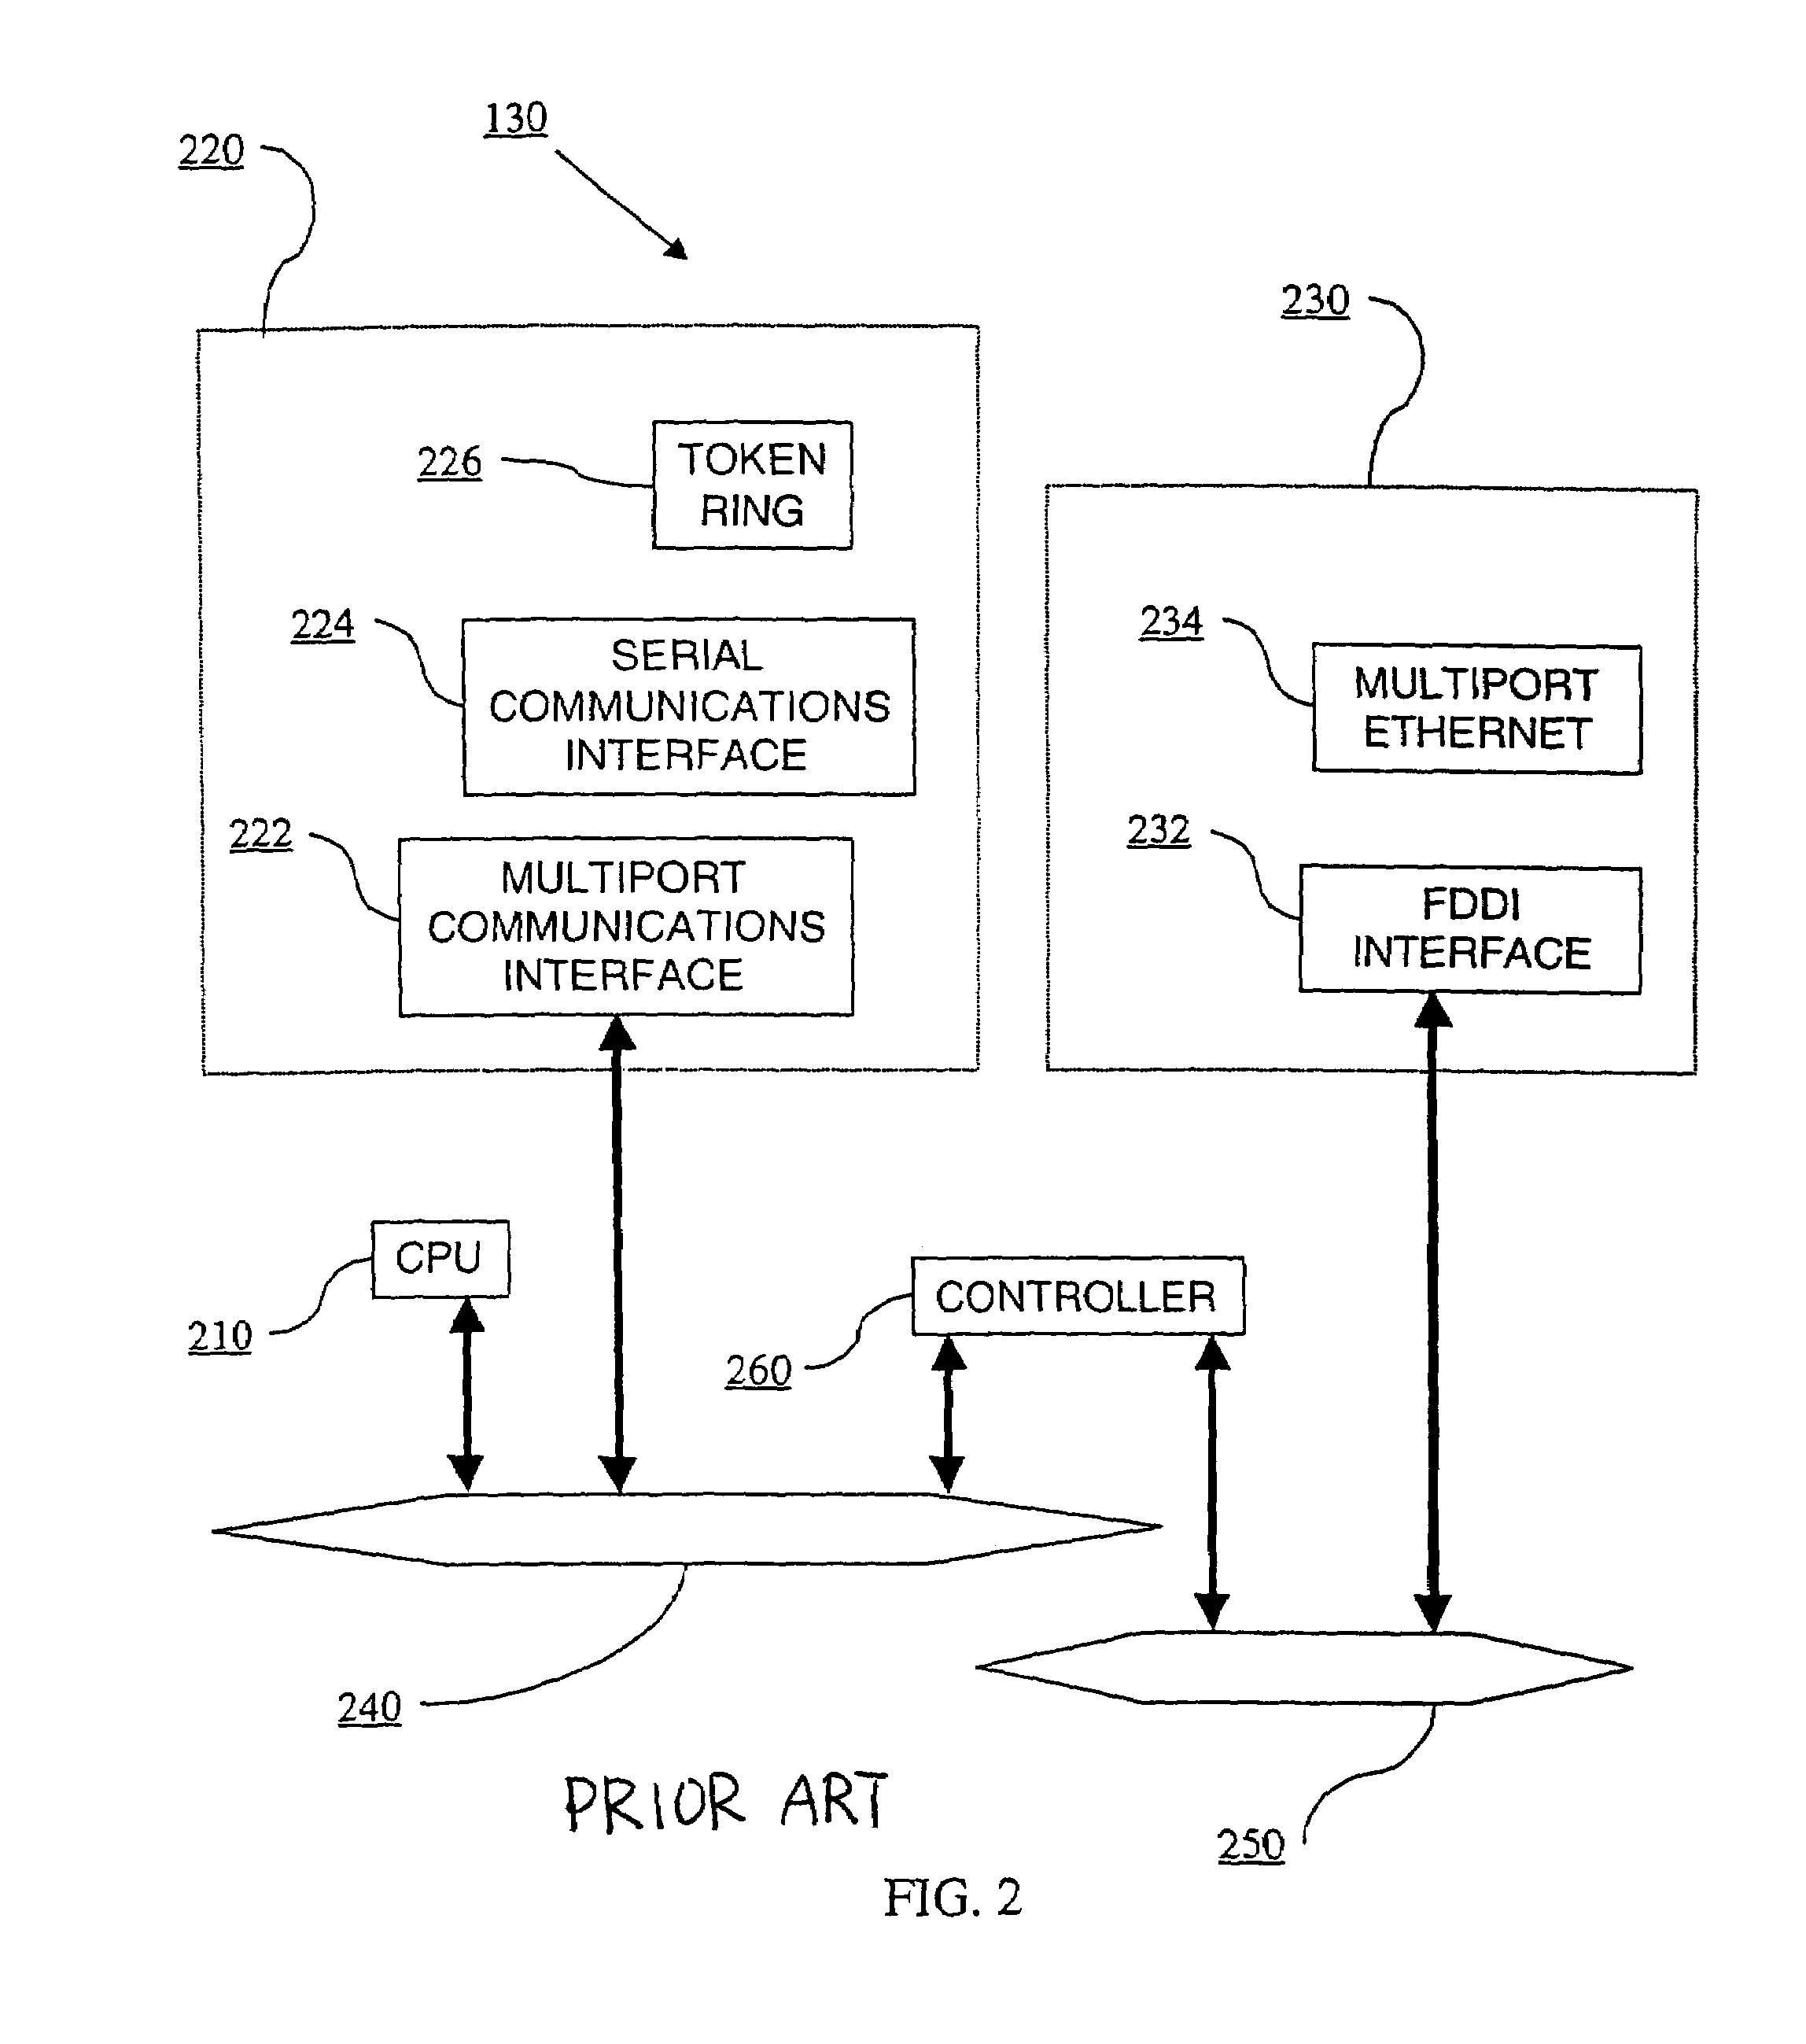 Apparatus and method for rate-based polling of input interface queues in networking devices